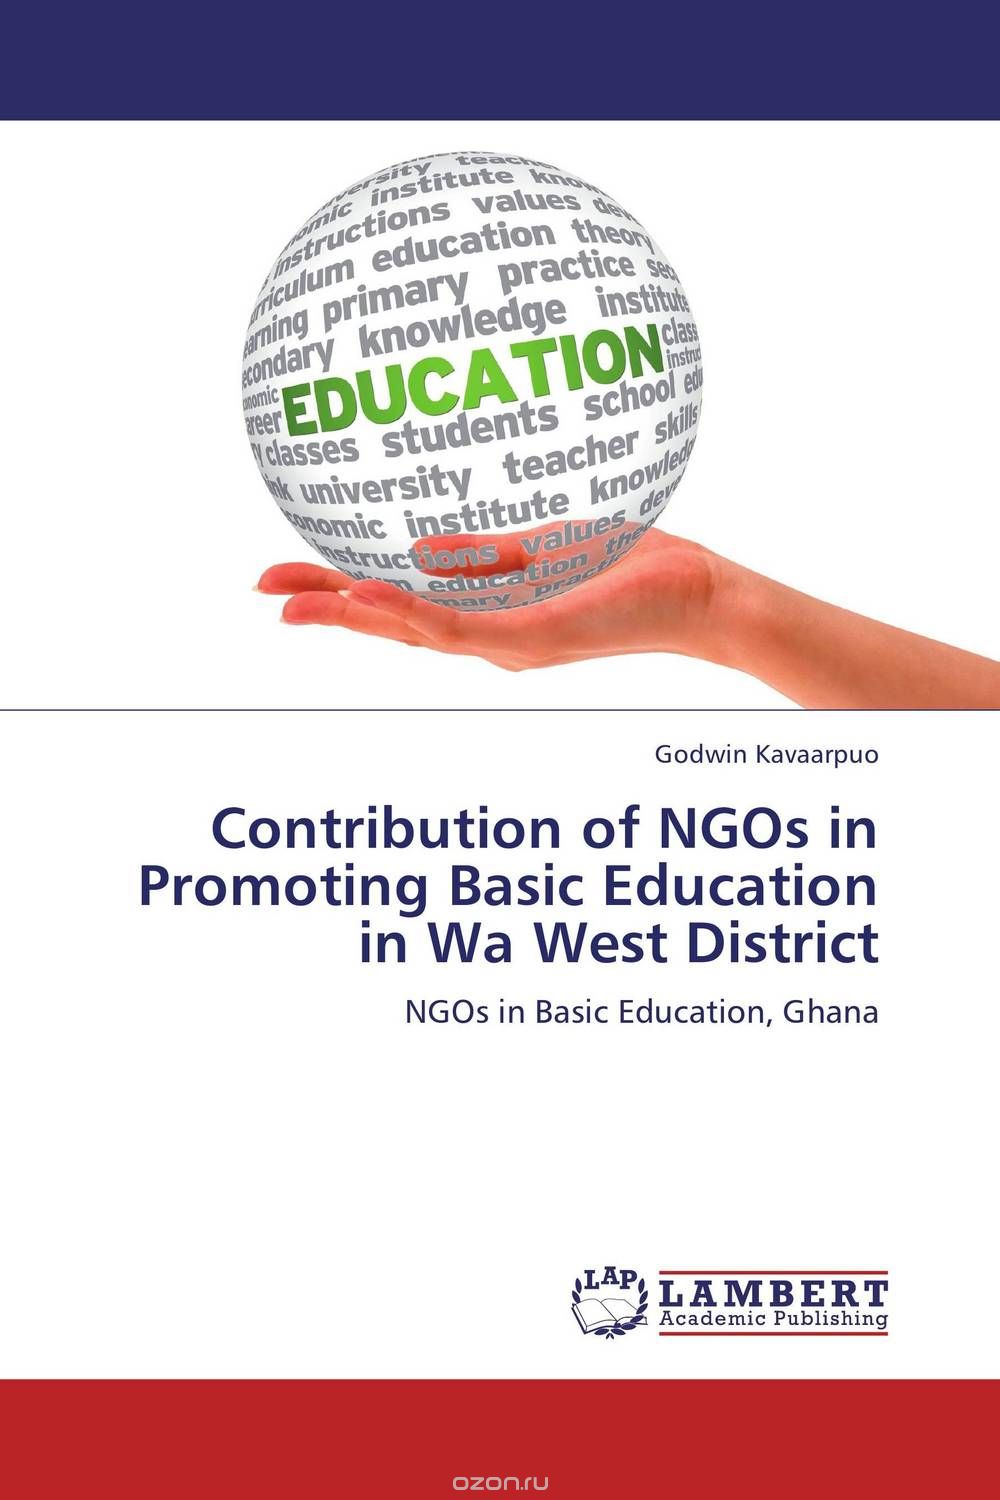 Скачать книгу "Contribution of NGOs in Promoting Basic Education in Wa West District"